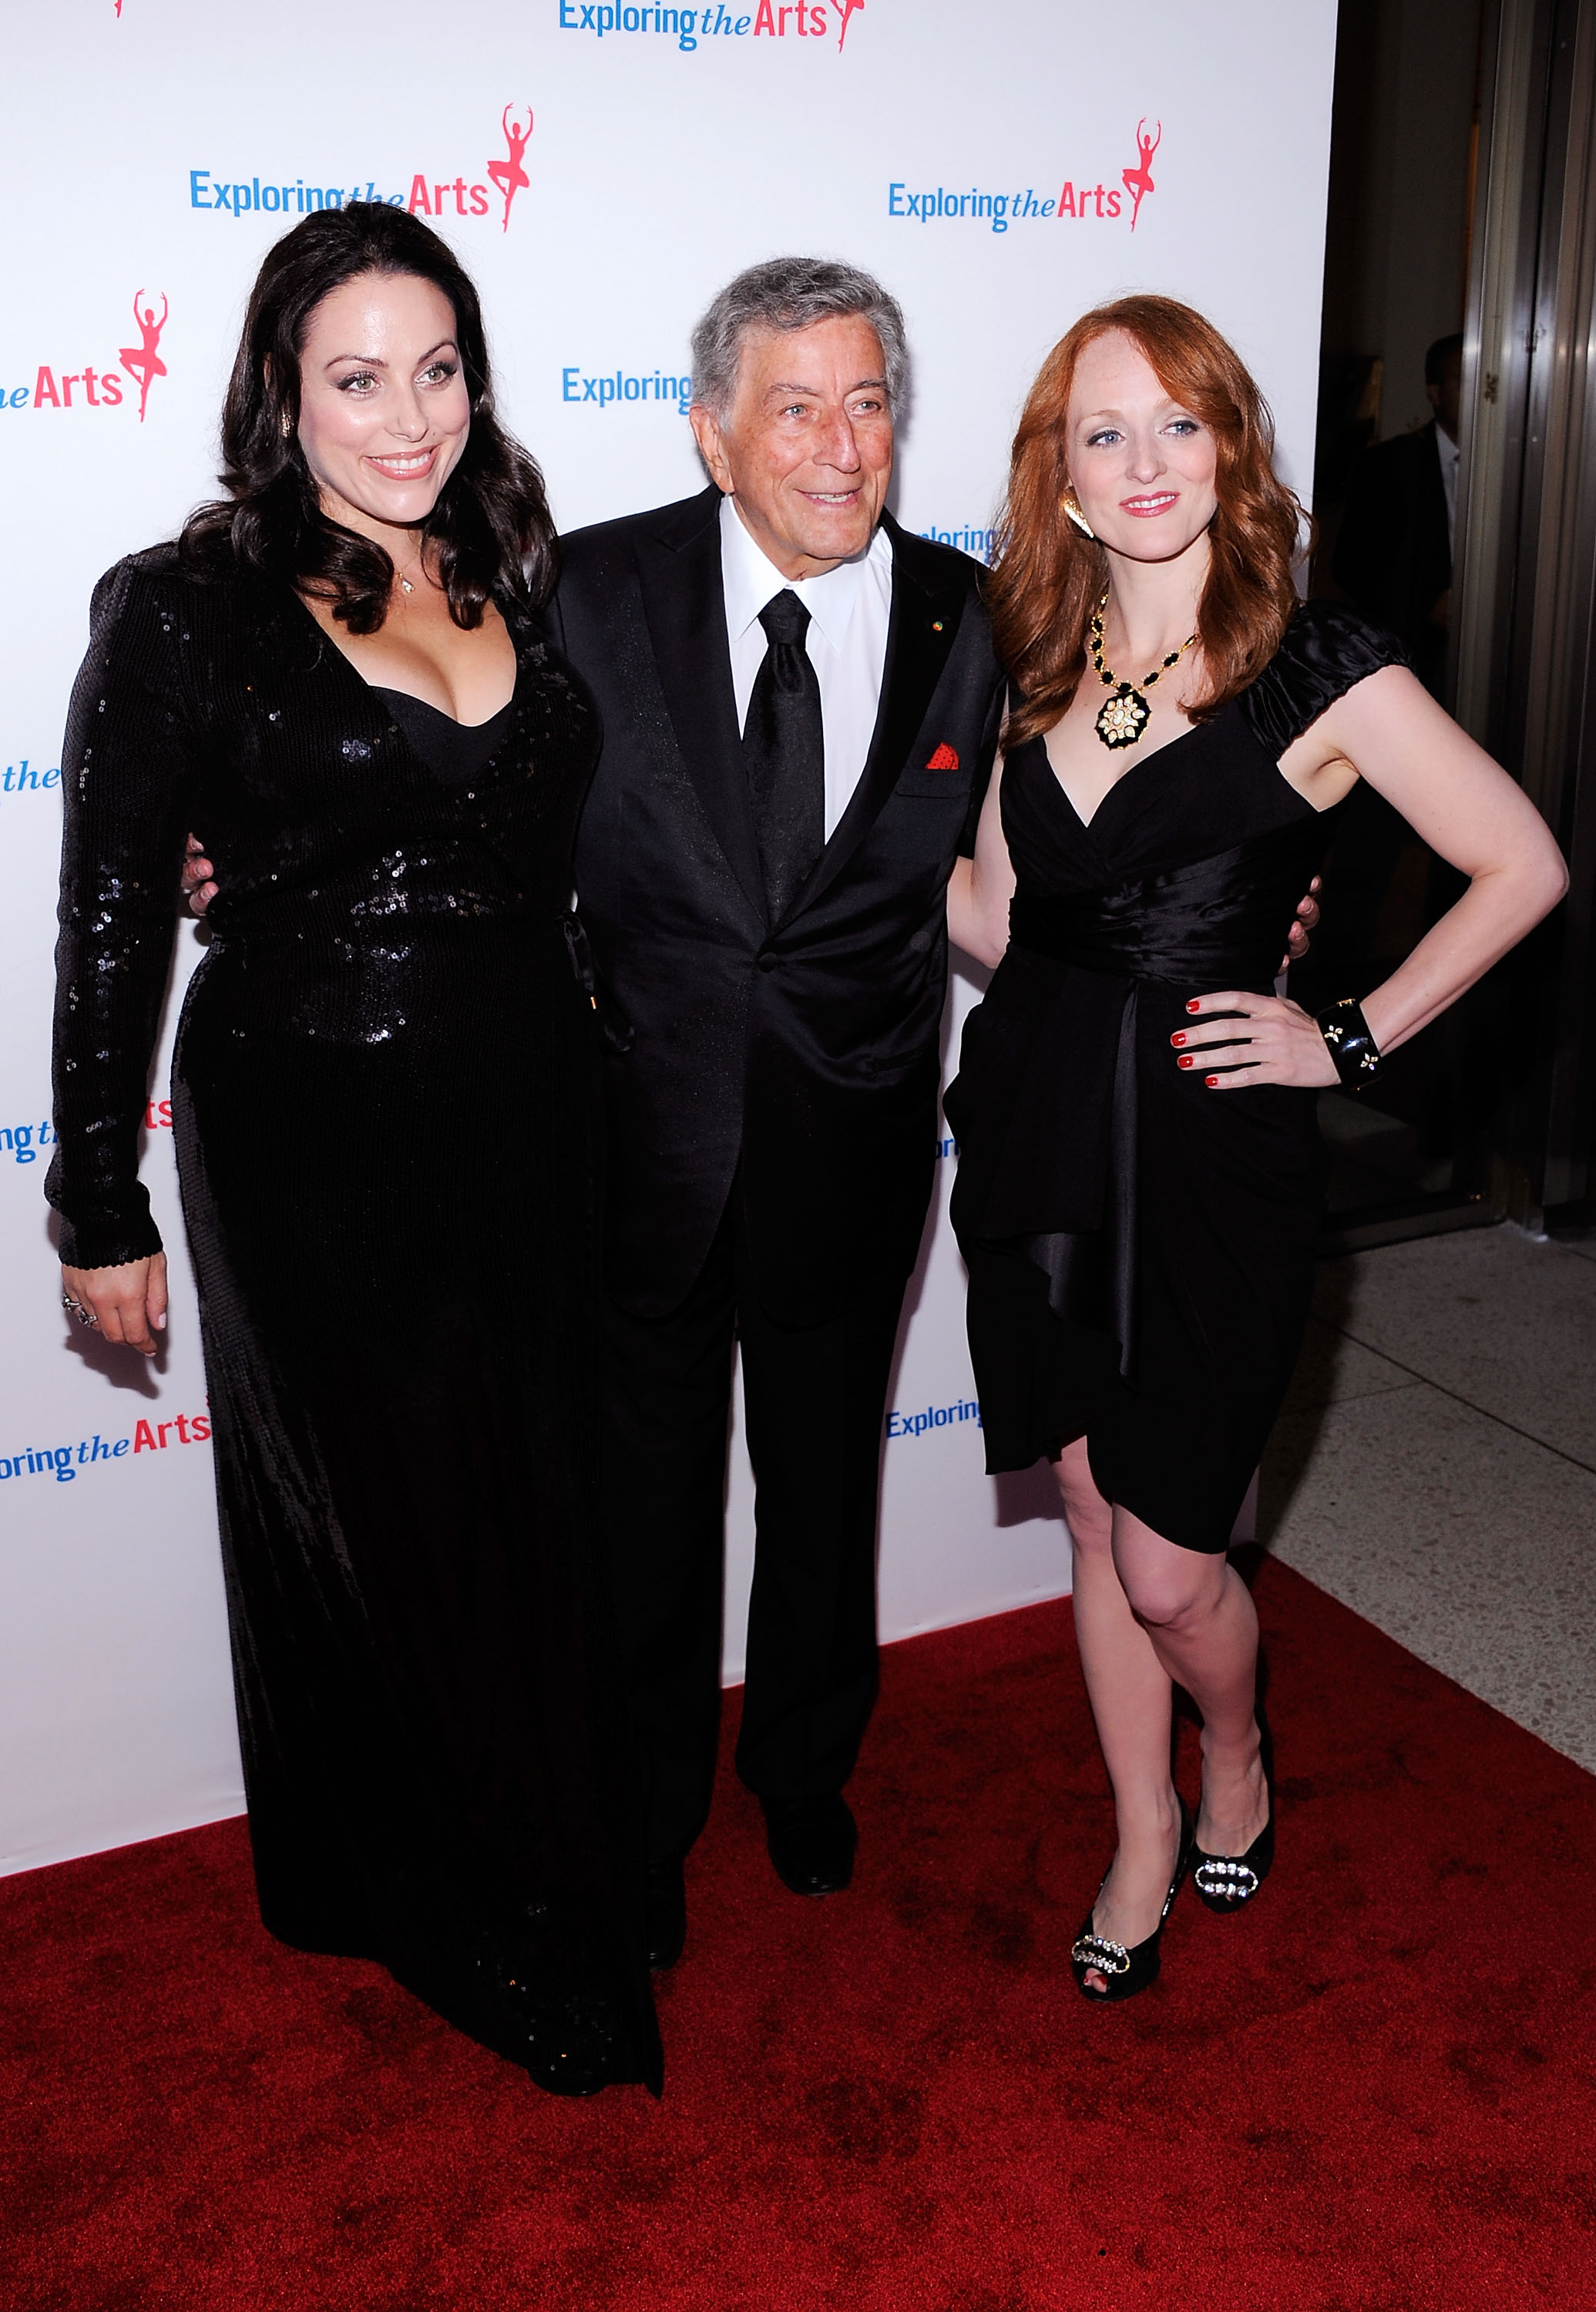 Joanna, Tony, and Antonia Bennett at the singer's 85th birthday gala on September 18, 2011, in New York City. | Source: Getty Images